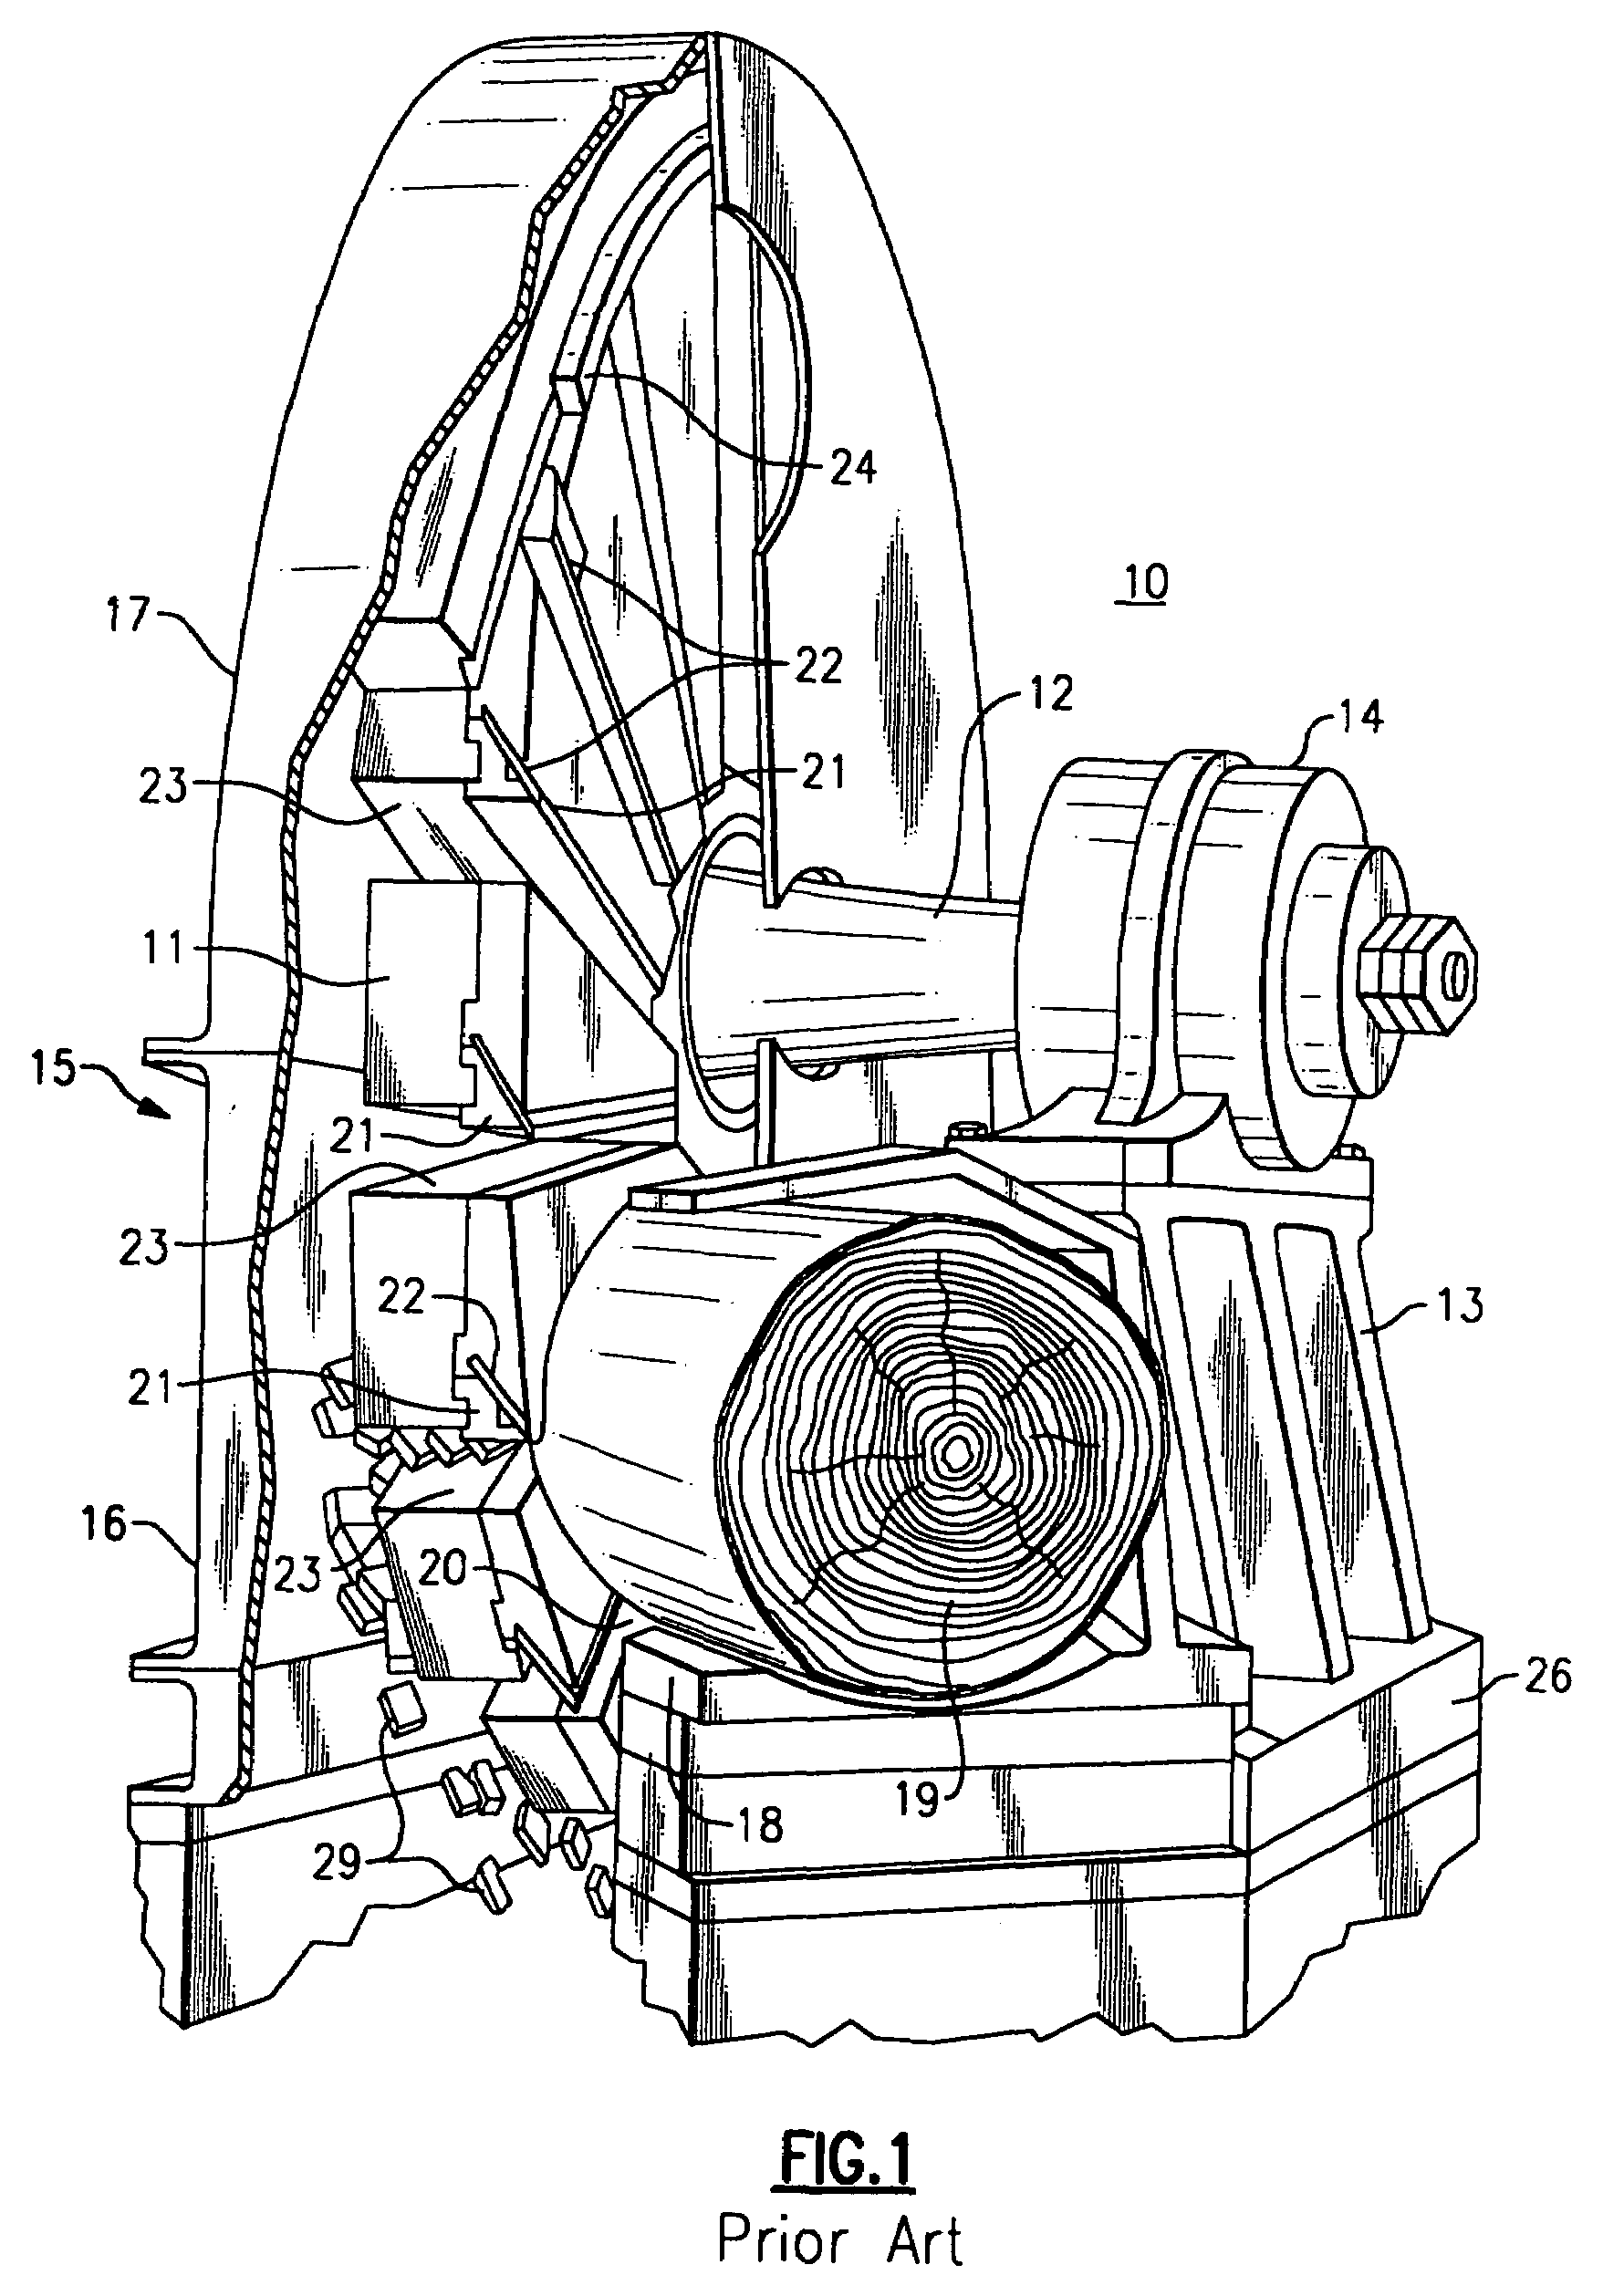 Stationary bedknife for disc chipper apparatus